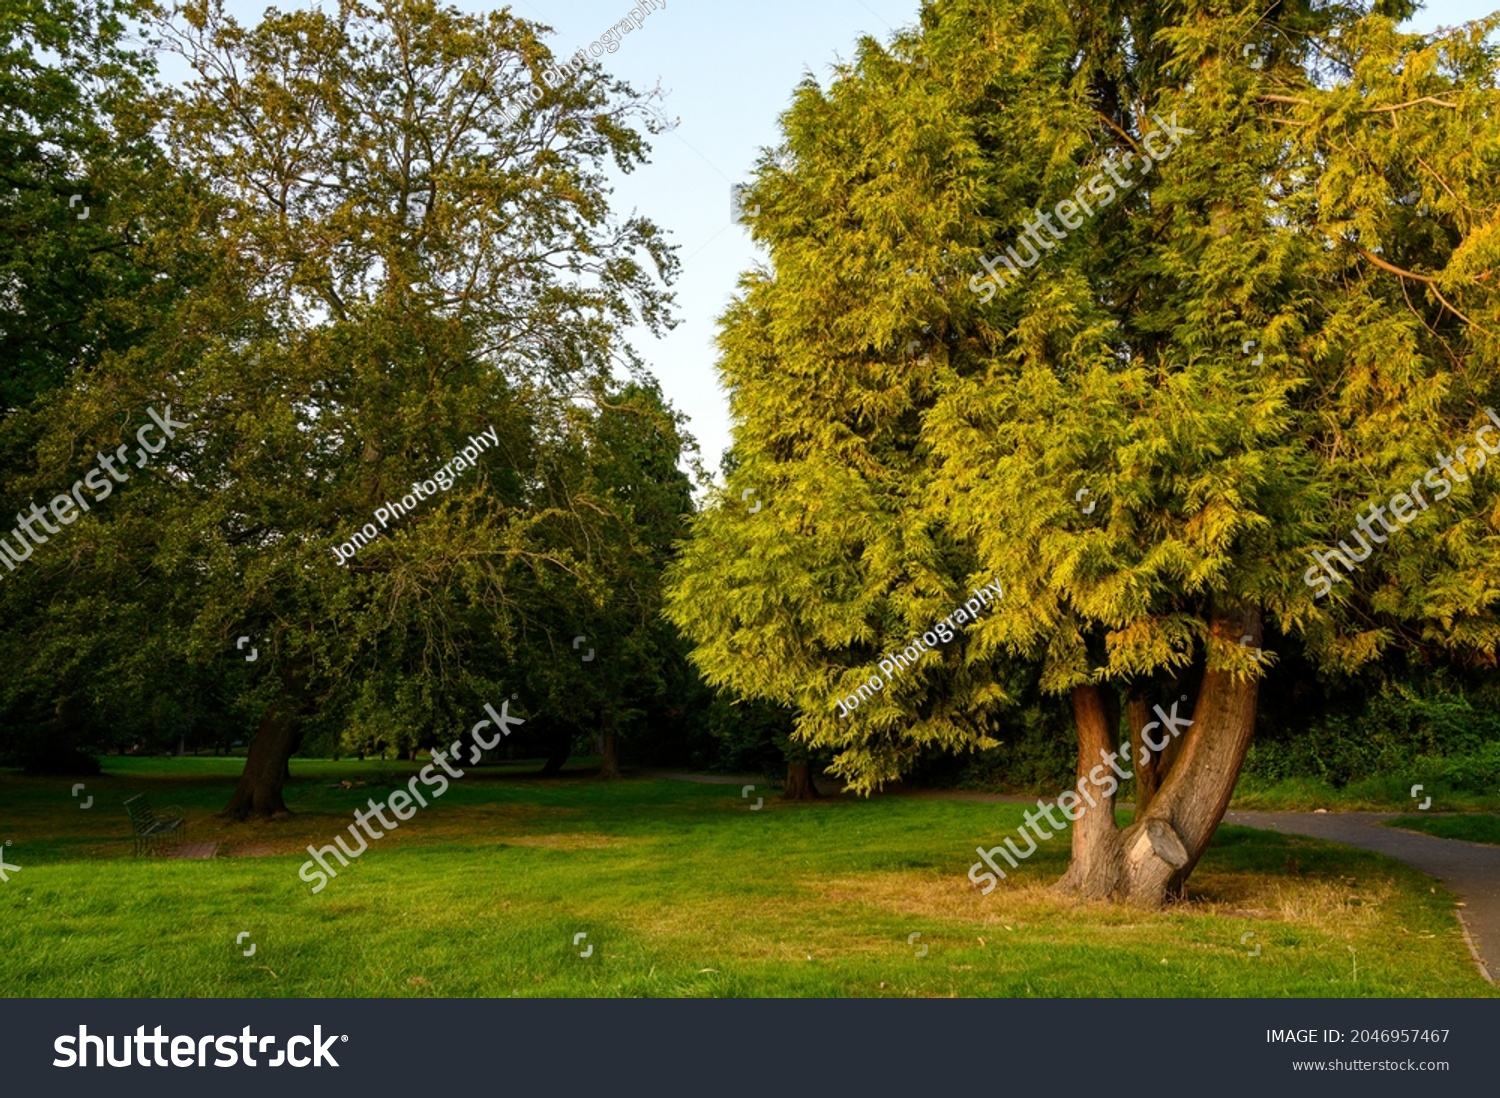 The Knoll, a small park in Hayes, Kent, UK. Trees in The Knoll park illuminated by the late afternoon sun. Hayes is in the Borough of Bromley in Greater London. #2046957467